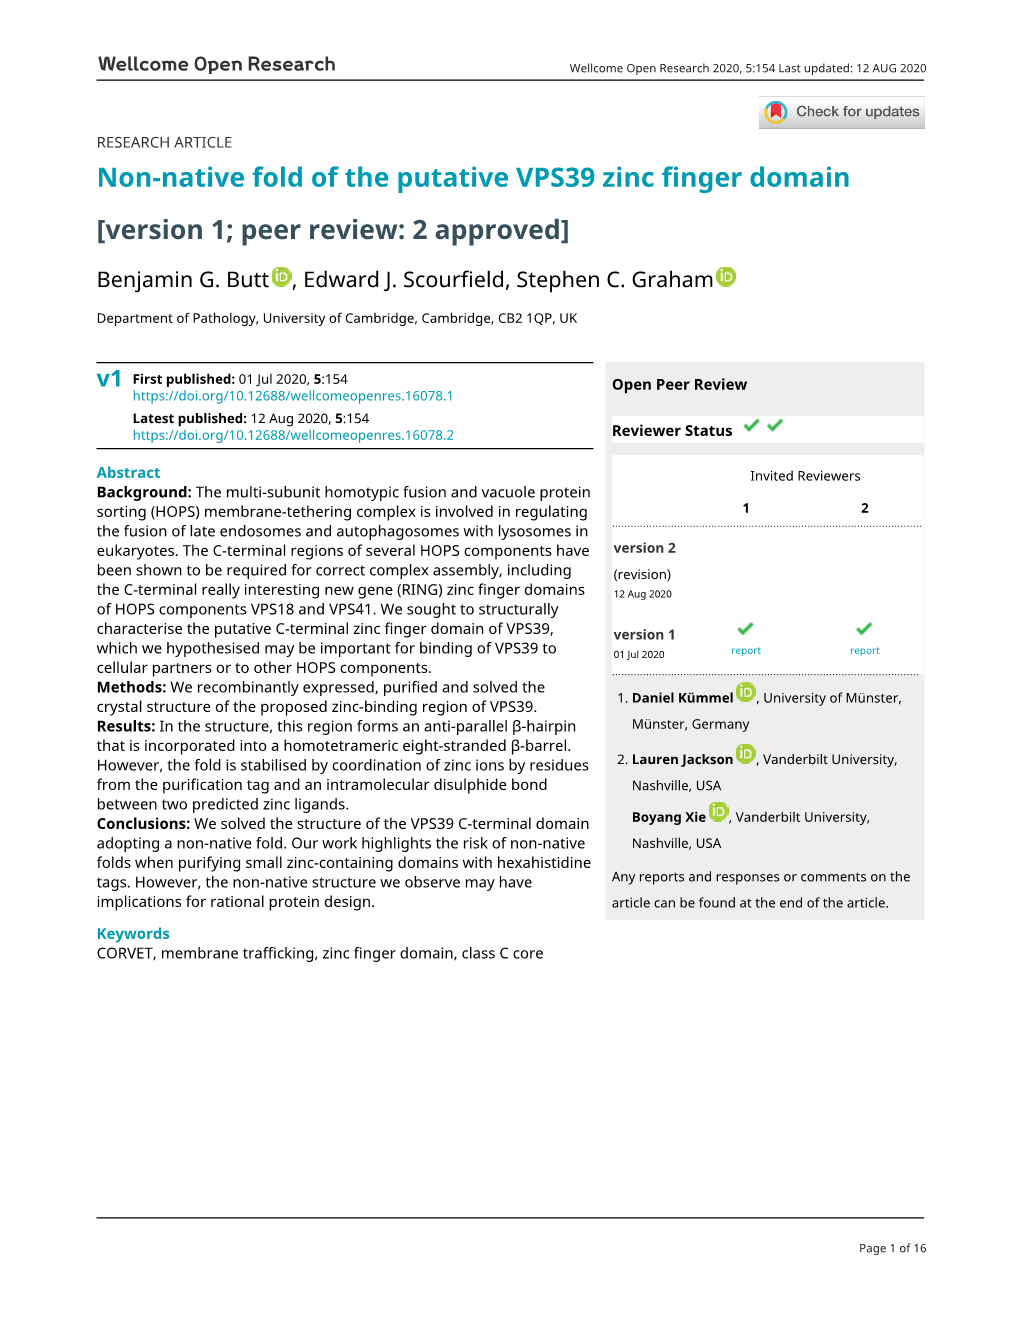 Non-Native Fold of the Putative VPS39 Zinc Finger Domain [Version 1; Peer Review: 2 Approved]